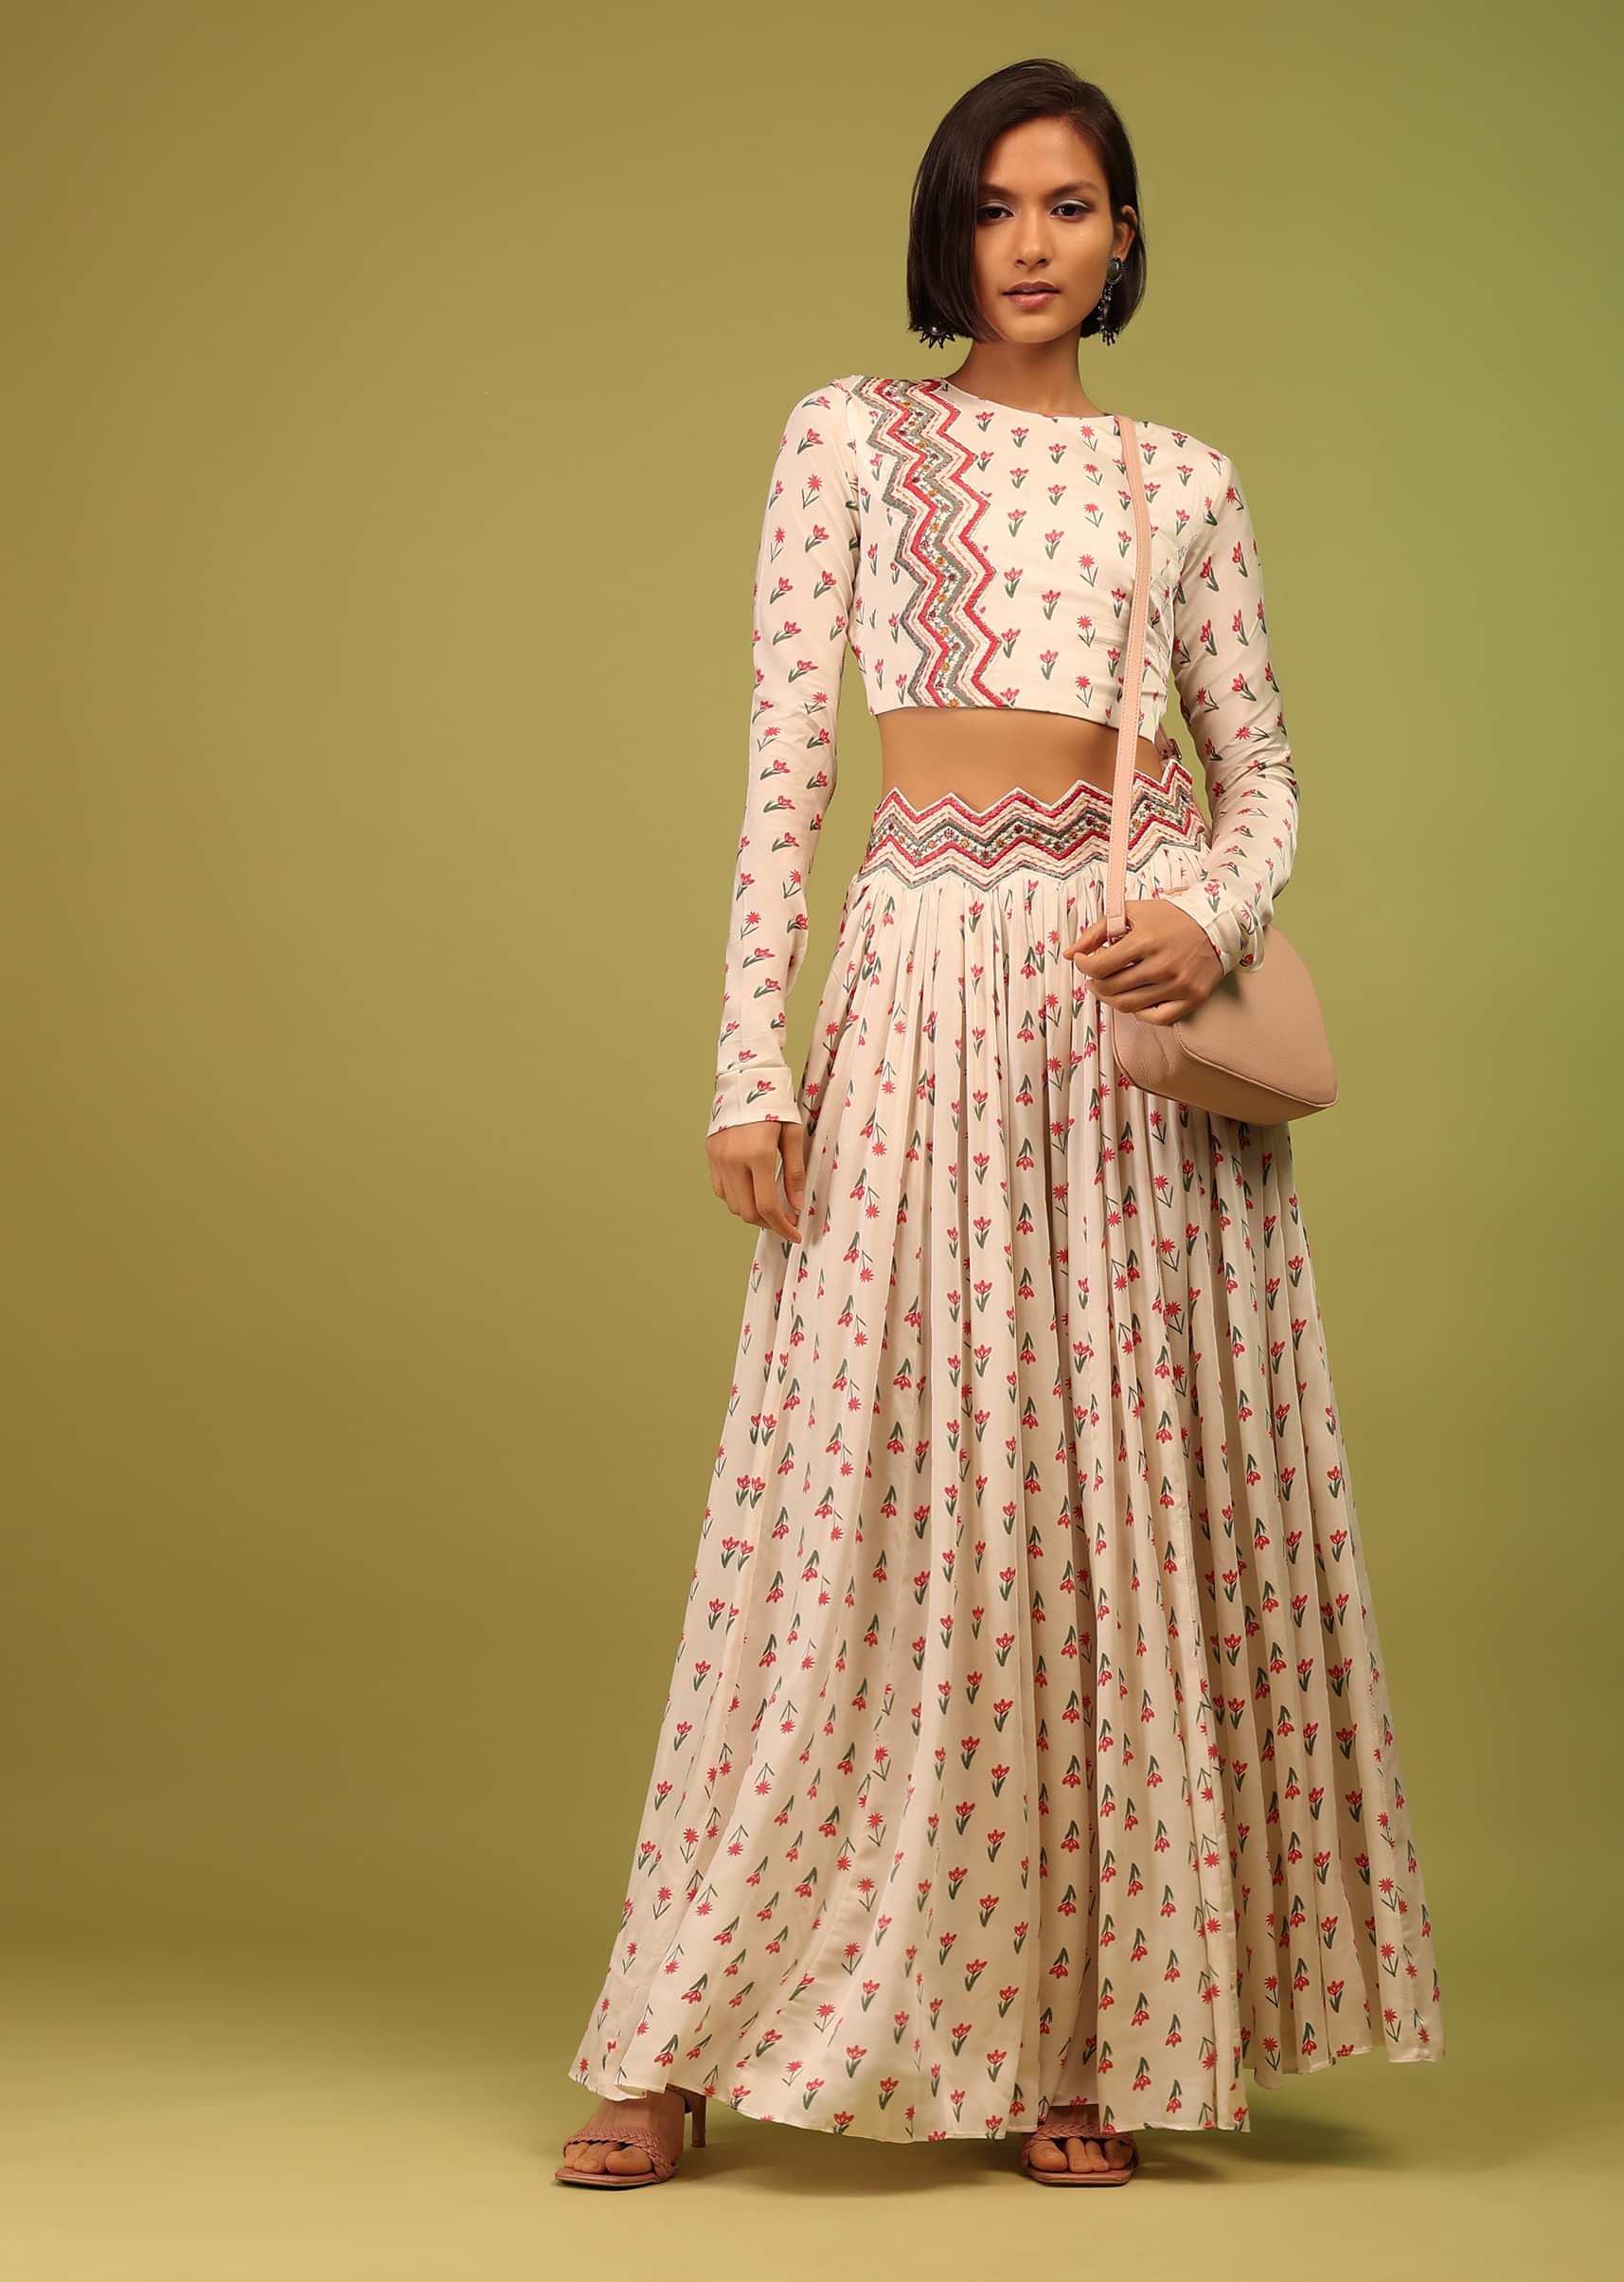 Daisy White Crop Top And Lehenga In Cotton Silk With Floral Print & Embroidery